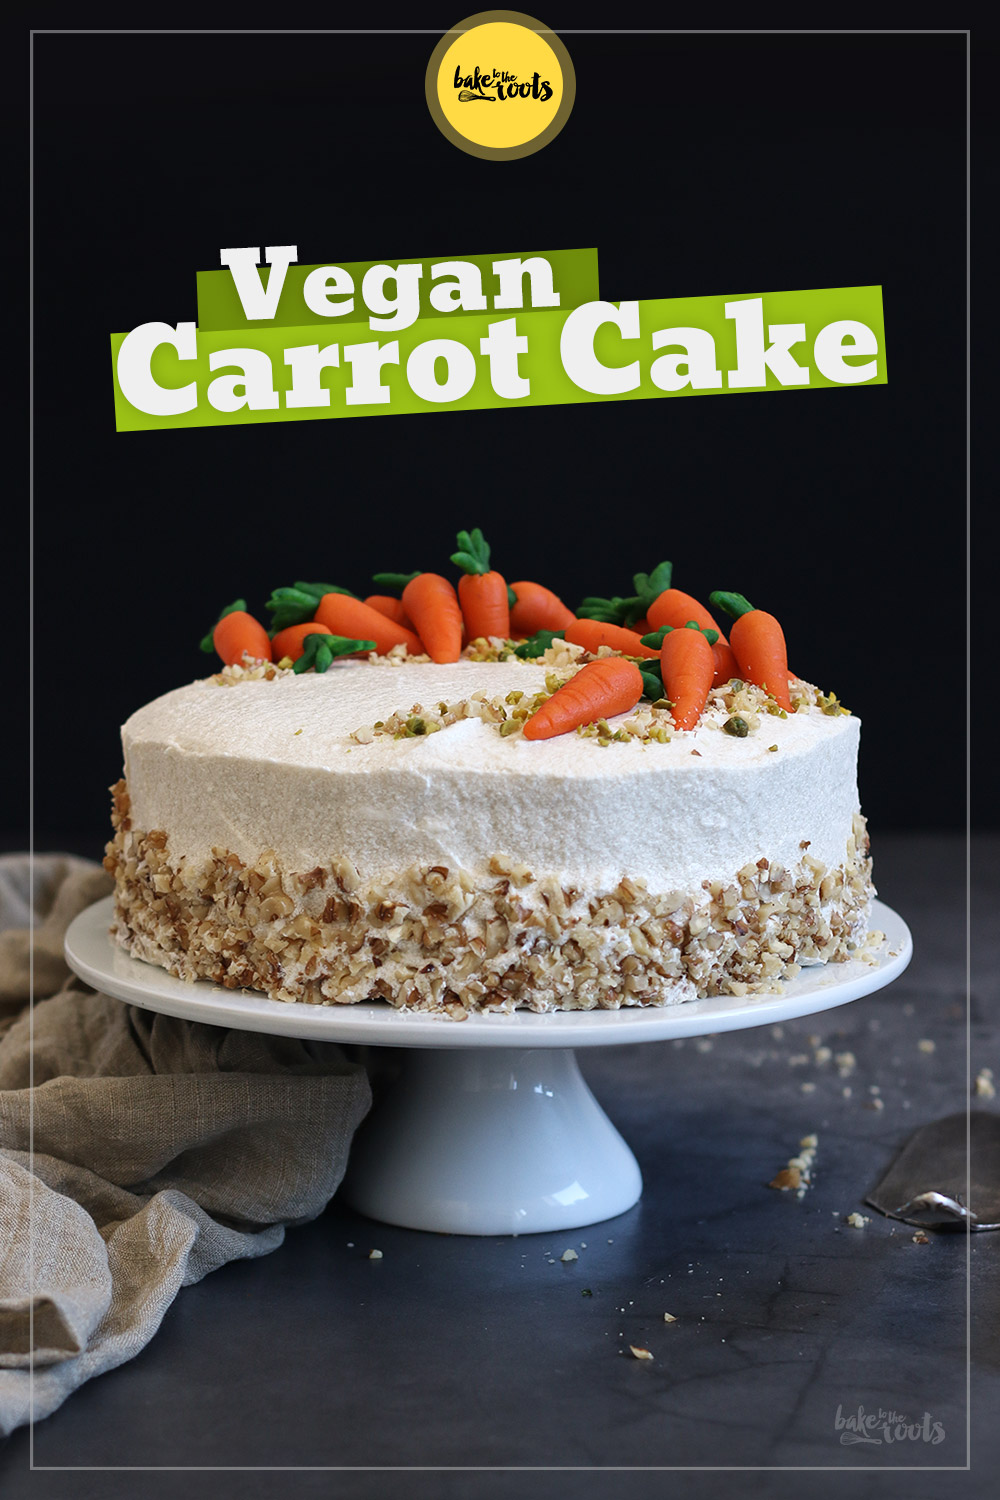 Vegan Carrot Cake with "Cream Cheese" Frosting | Bake to the roots